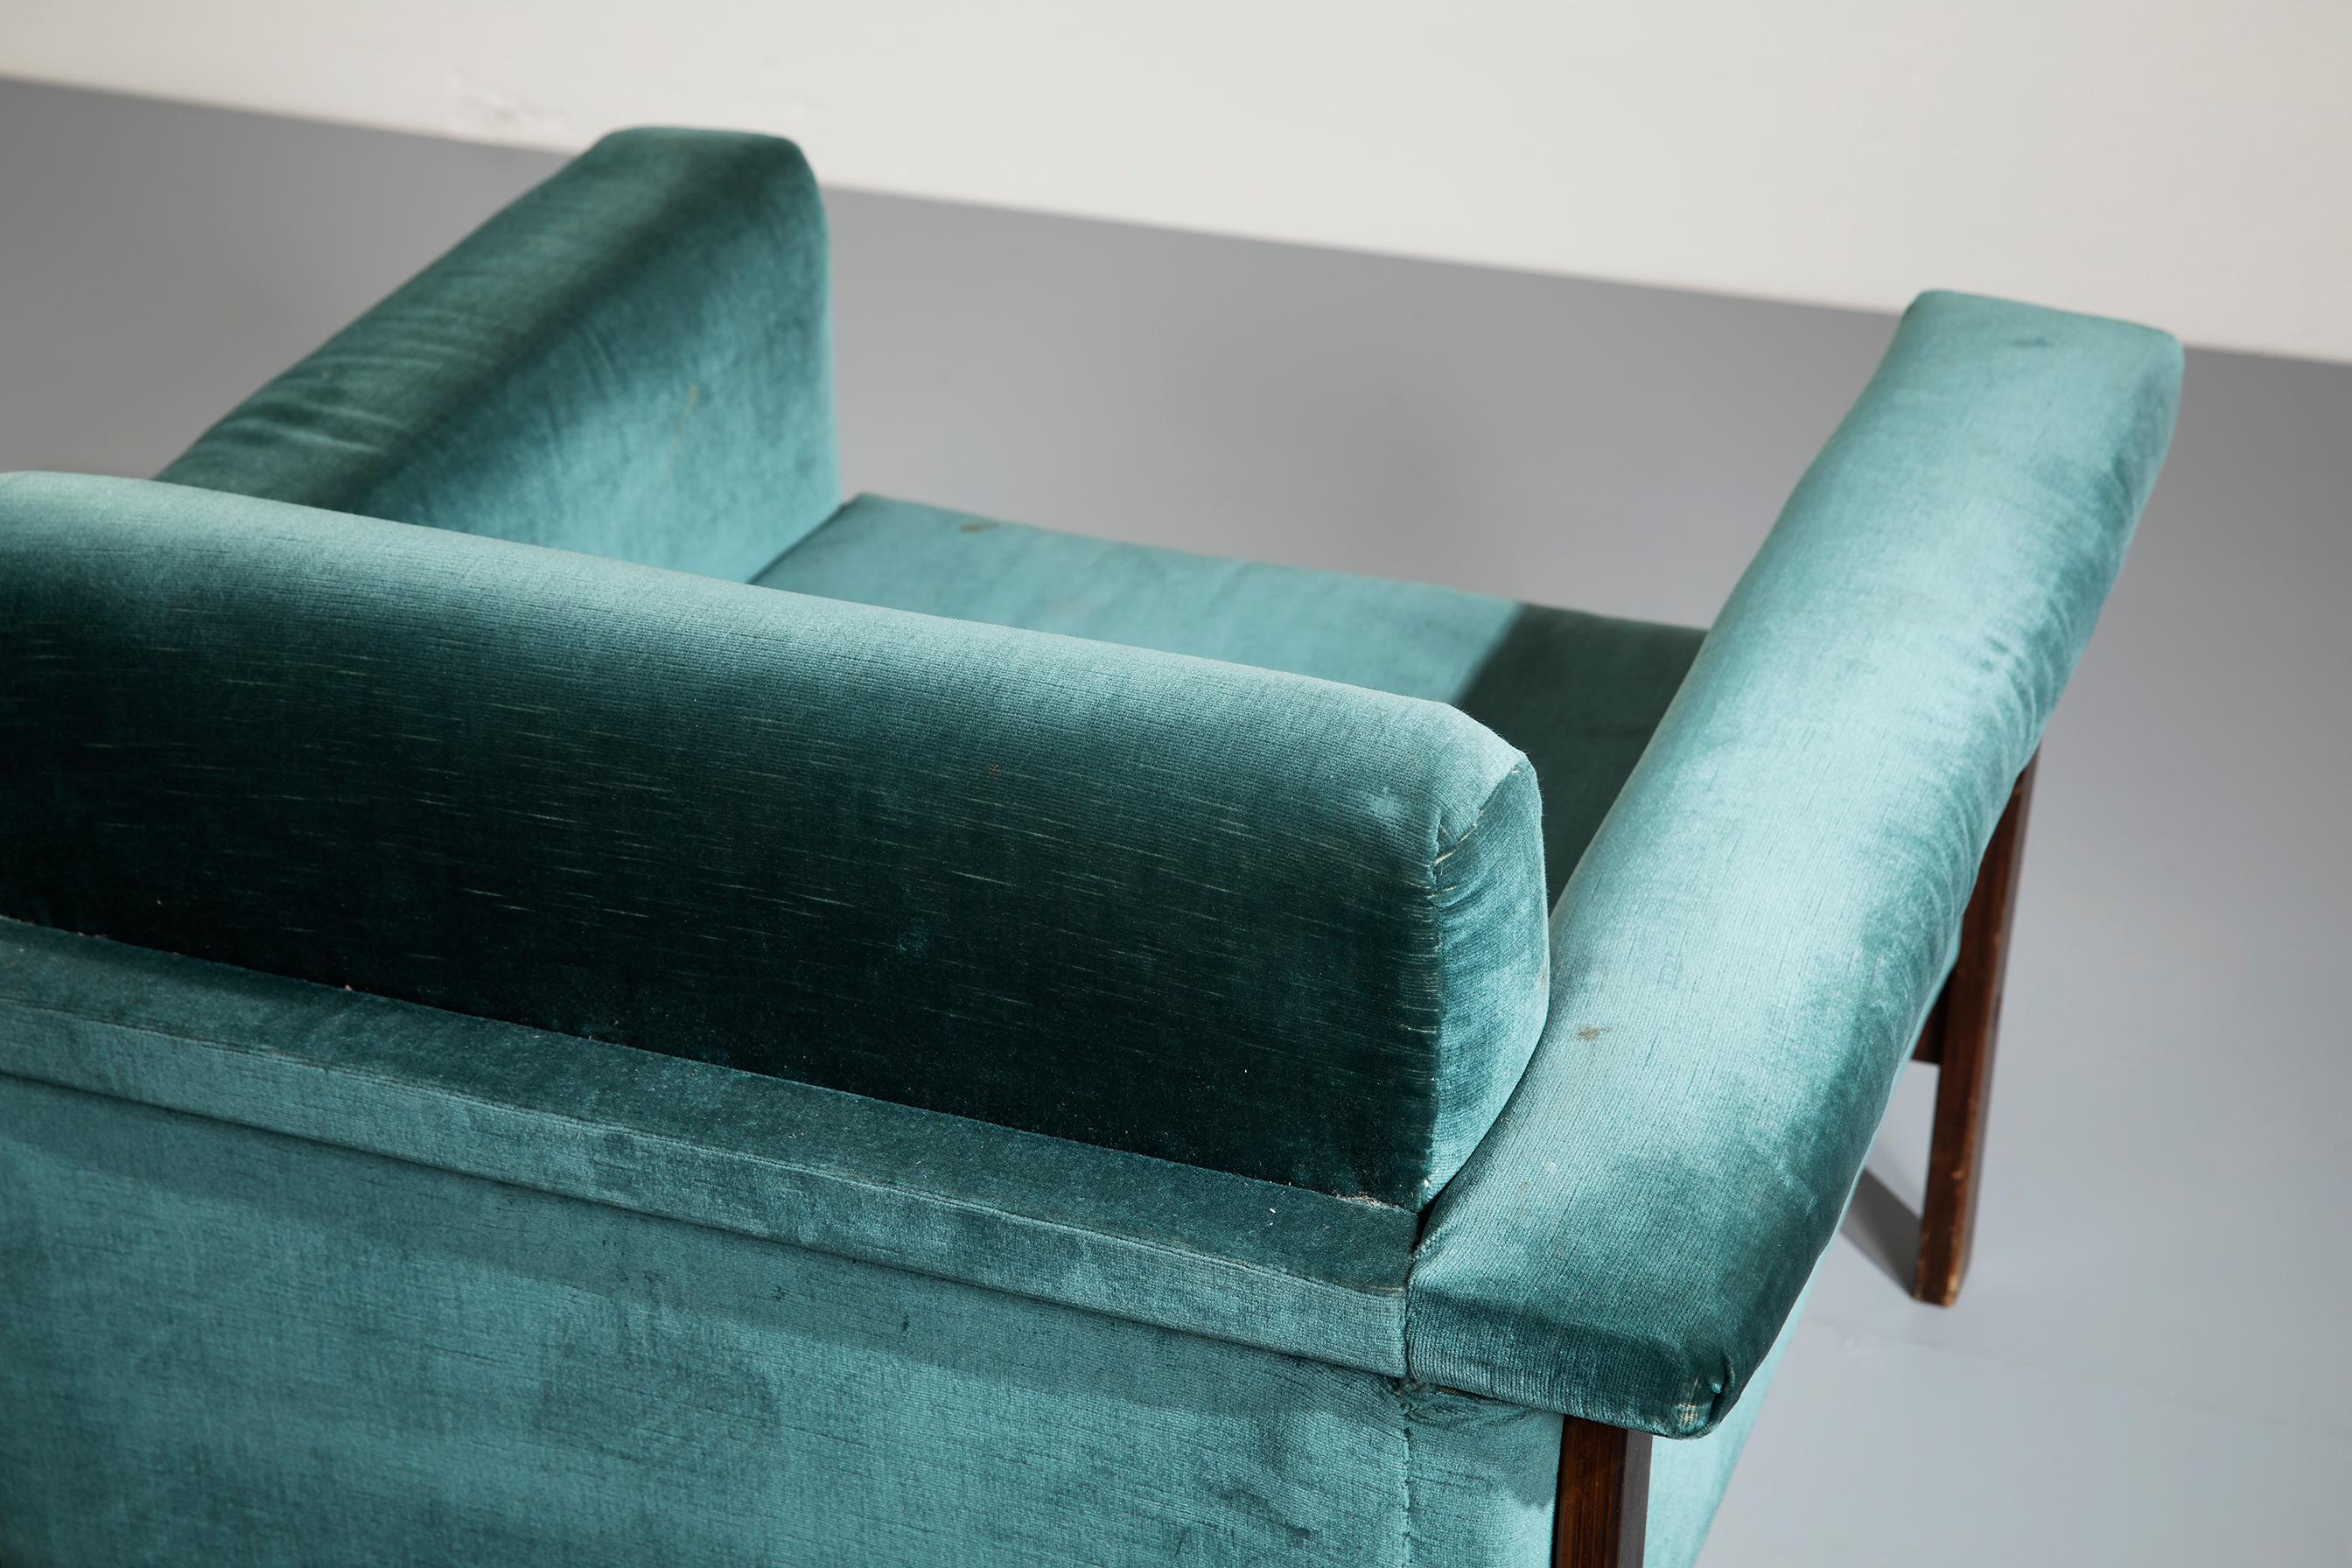 Ettore Sottsass Rosewood and Teal Fabric 'Canada' Armchair for Poltronova, 1958 For Sale 9